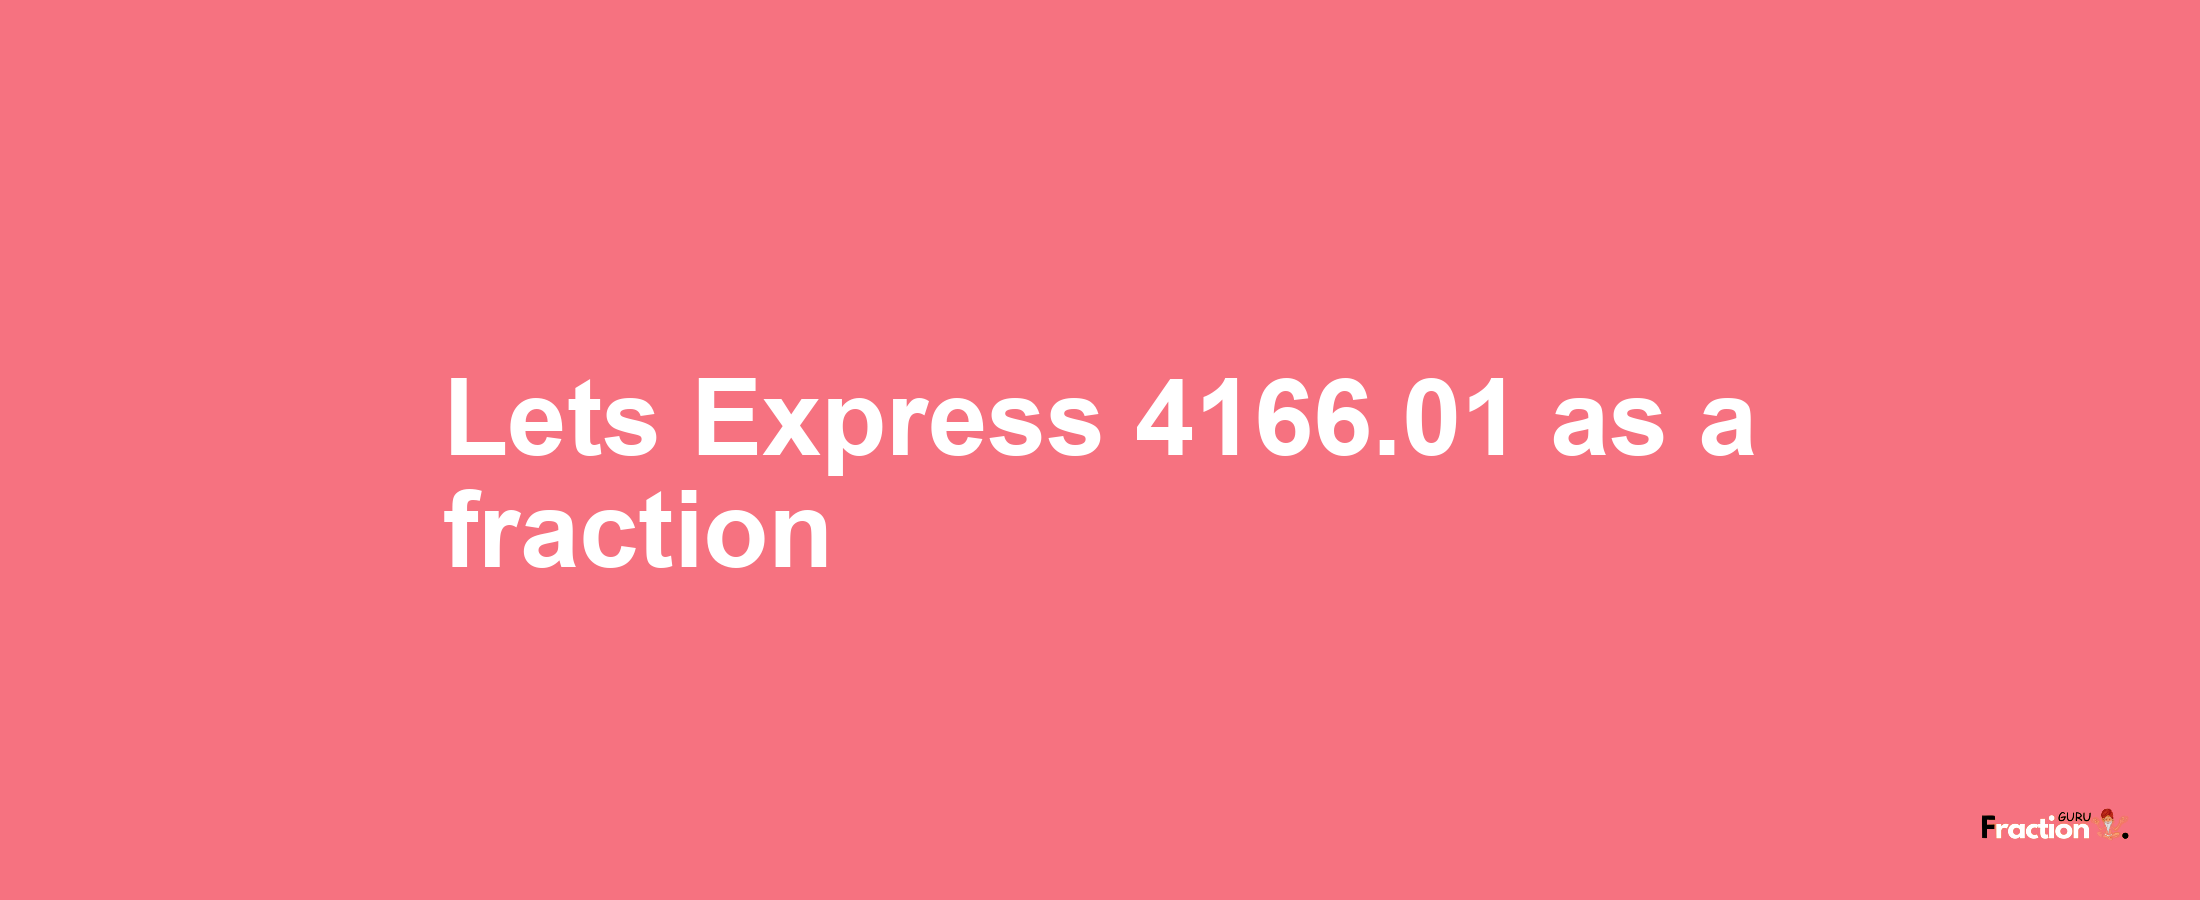 Lets Express 4166.01 as afraction